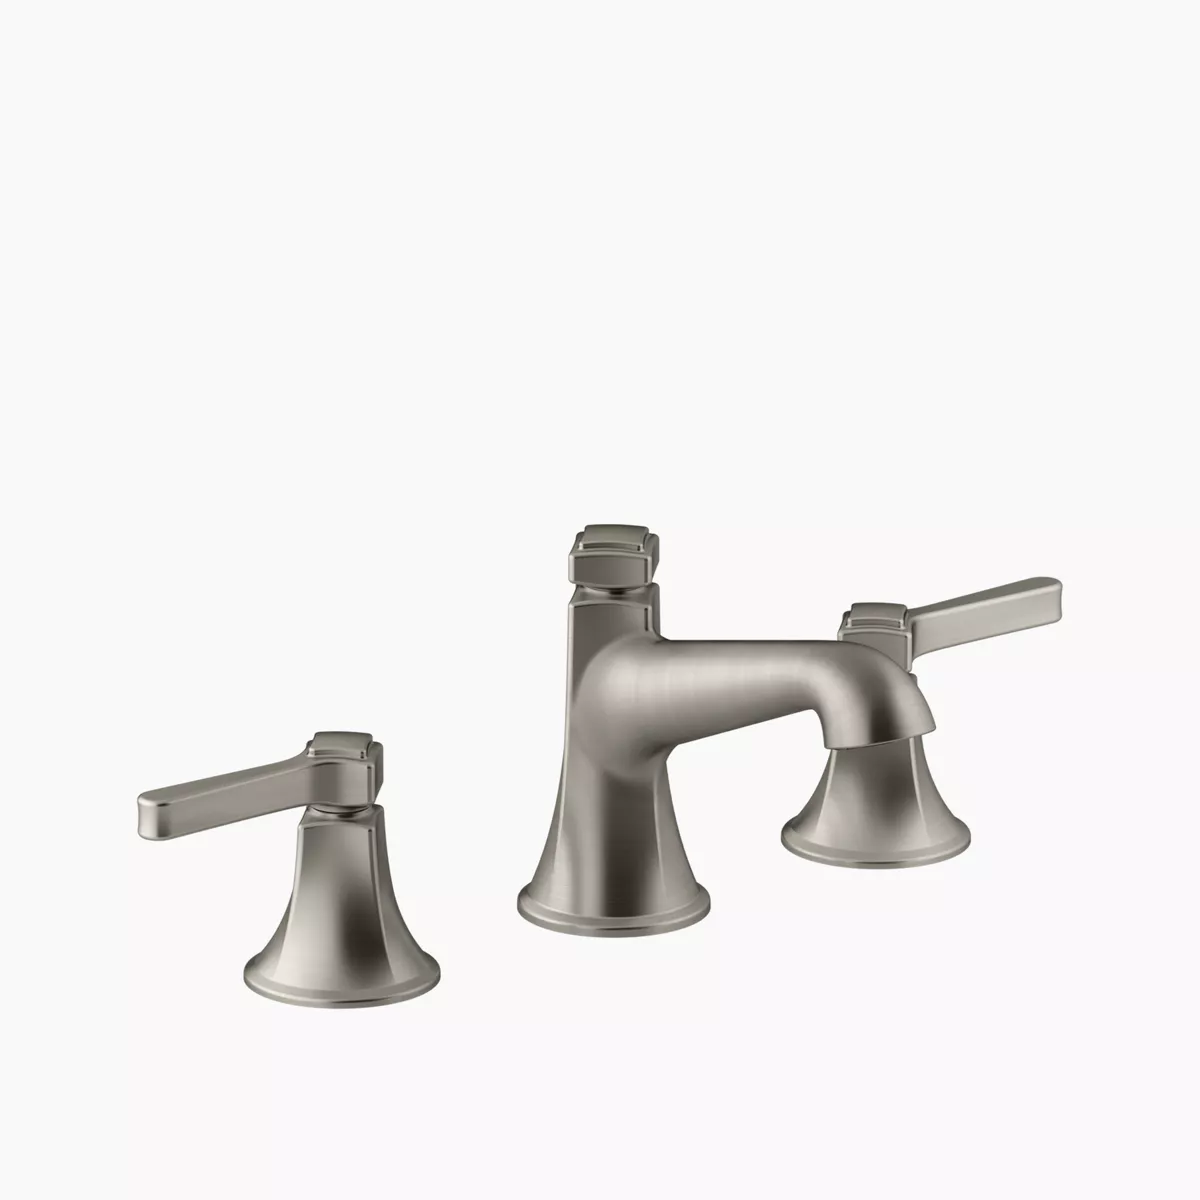 Forte® Collection Showerheads, Handshowers, Faucets, & More | KOHLER